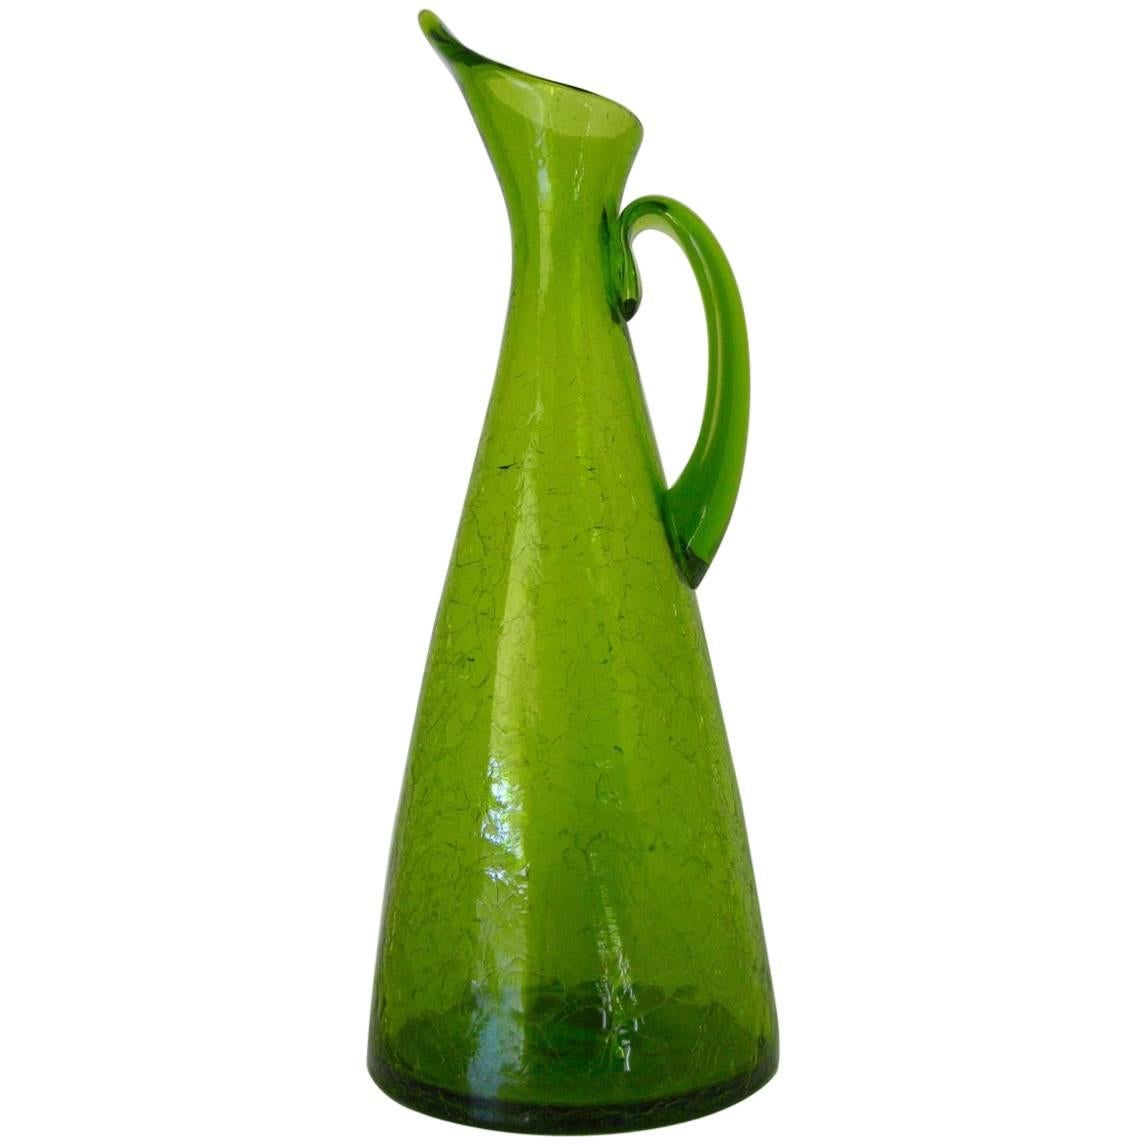 1963 Blenko Tall Crackle Glass 976 Pitcher by Winslow Anderson For Sale